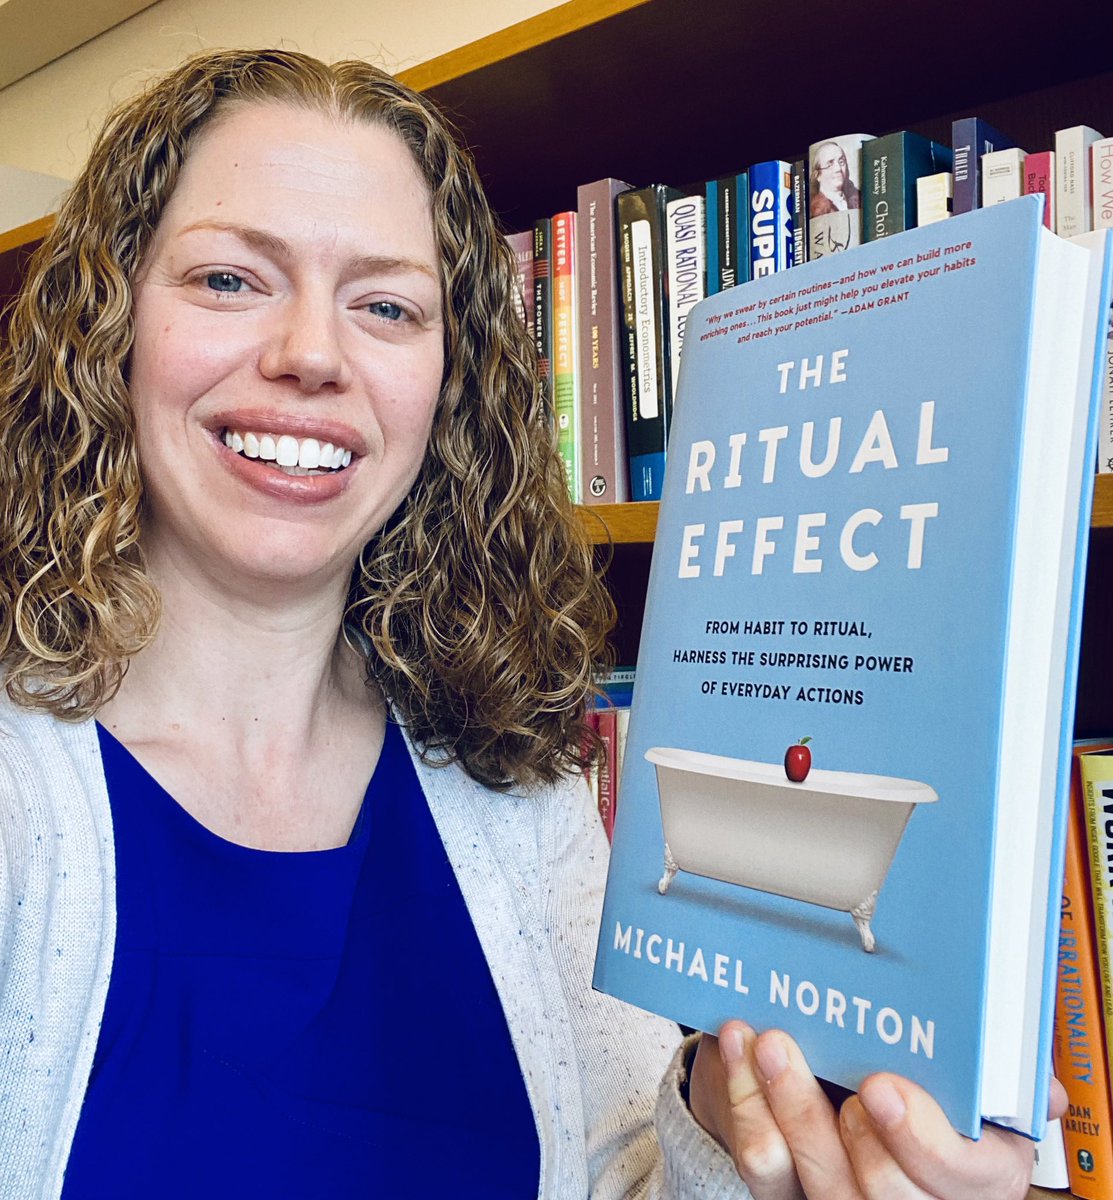 Happy publication day to the extraordinary Prof. Mike Norton of @HarvardHBS! THE RITUAL EFFECT is a must read to help you reach your potential and live a fuller life.